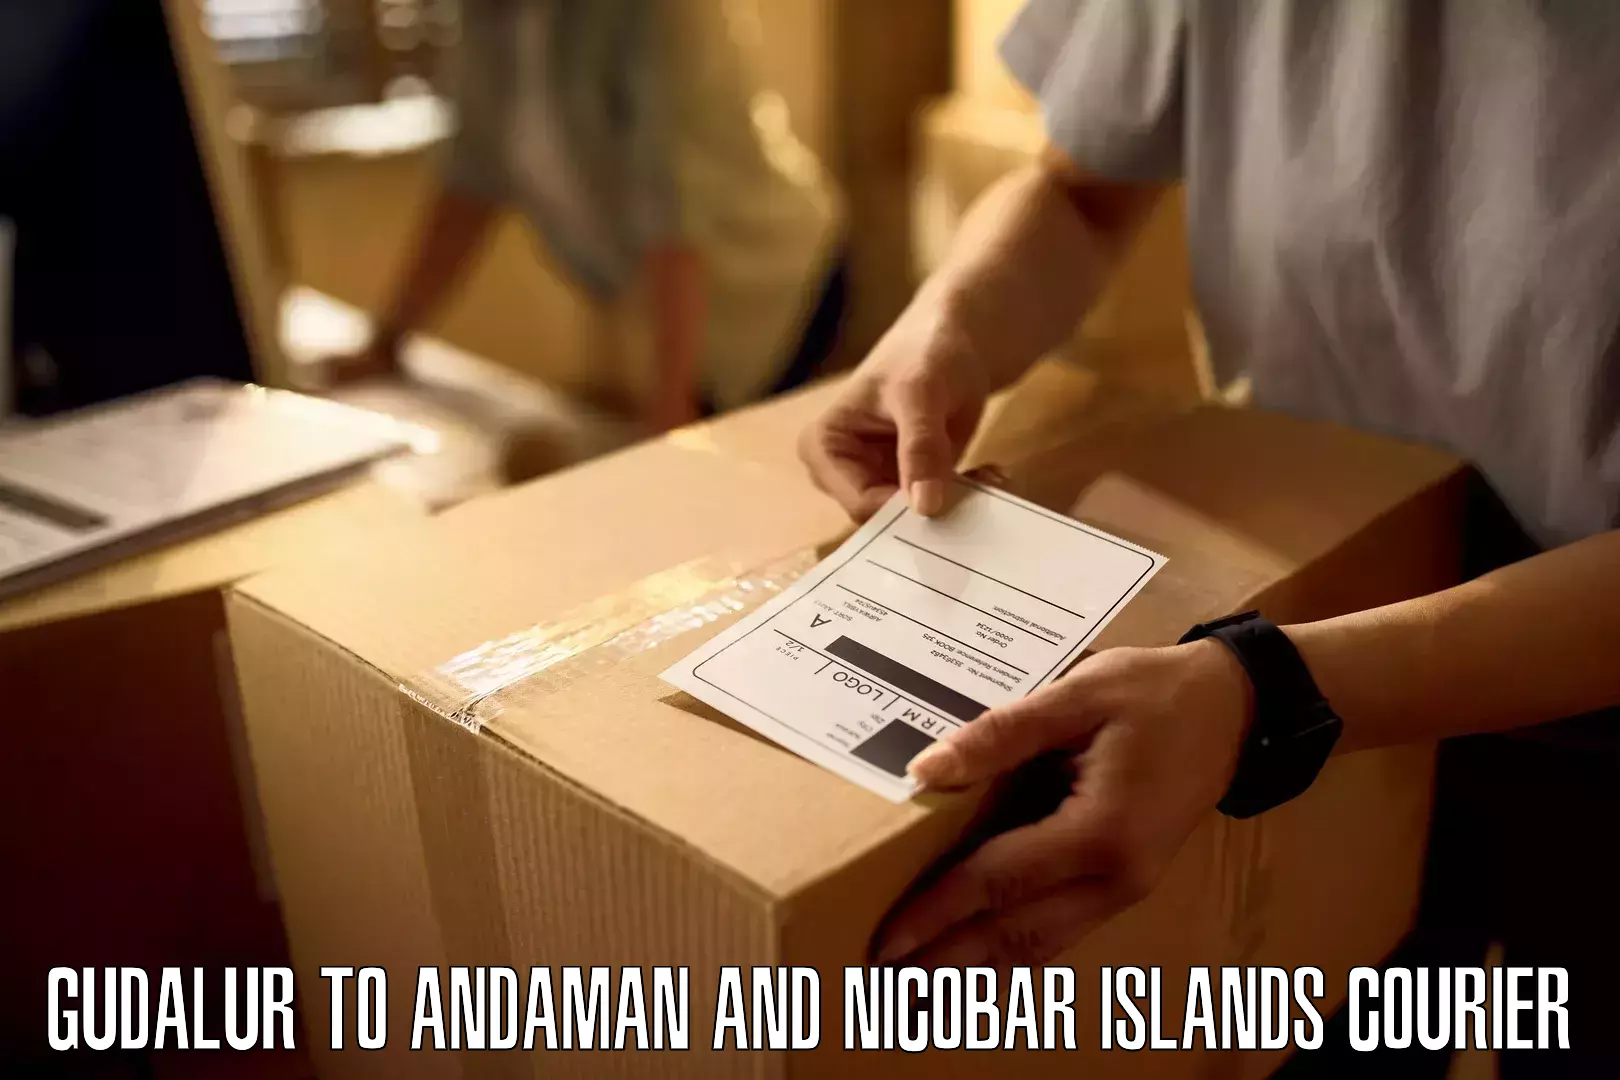 Automated parcel services Gudalur to Andaman and Nicobar Islands